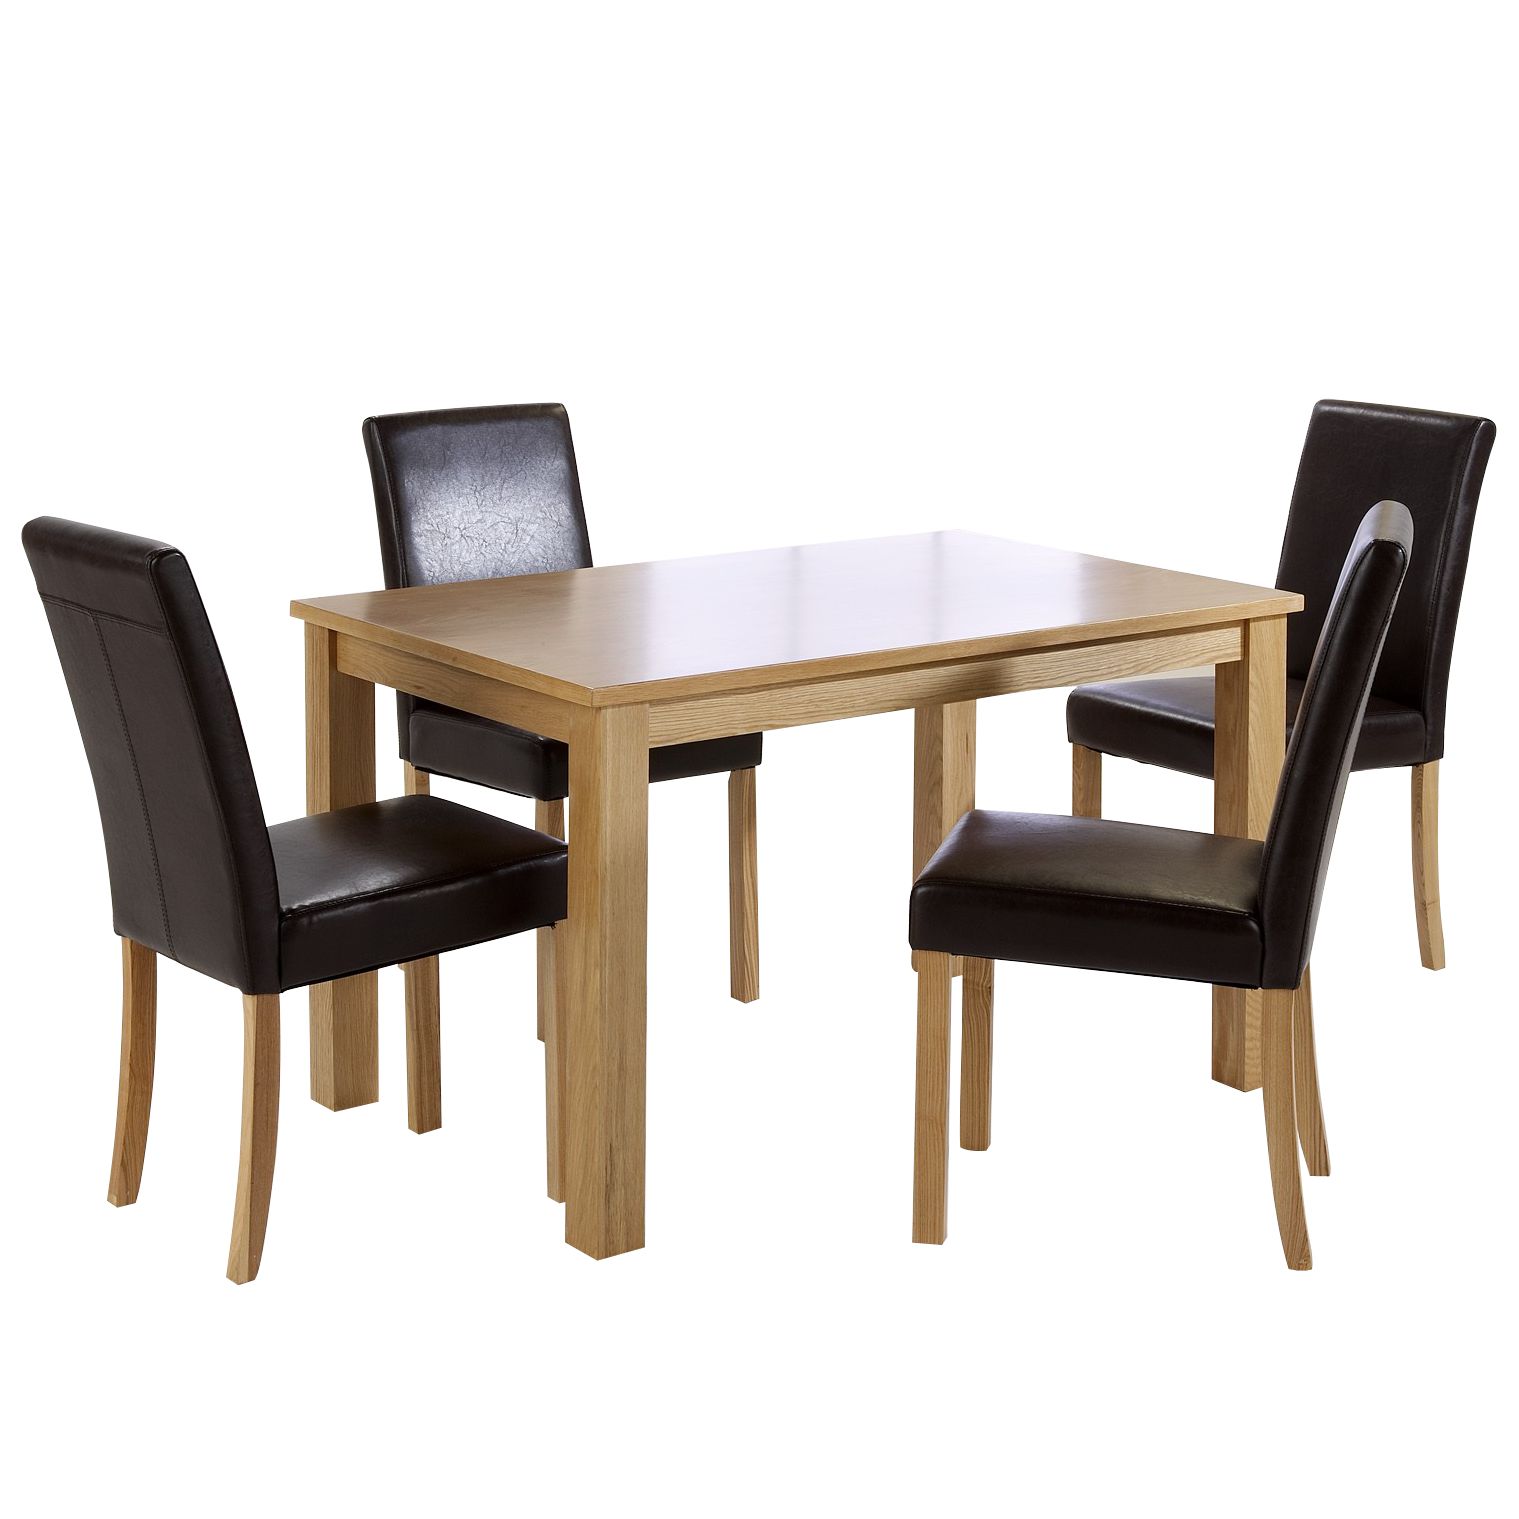 Linden 4 Seater Dining Table and